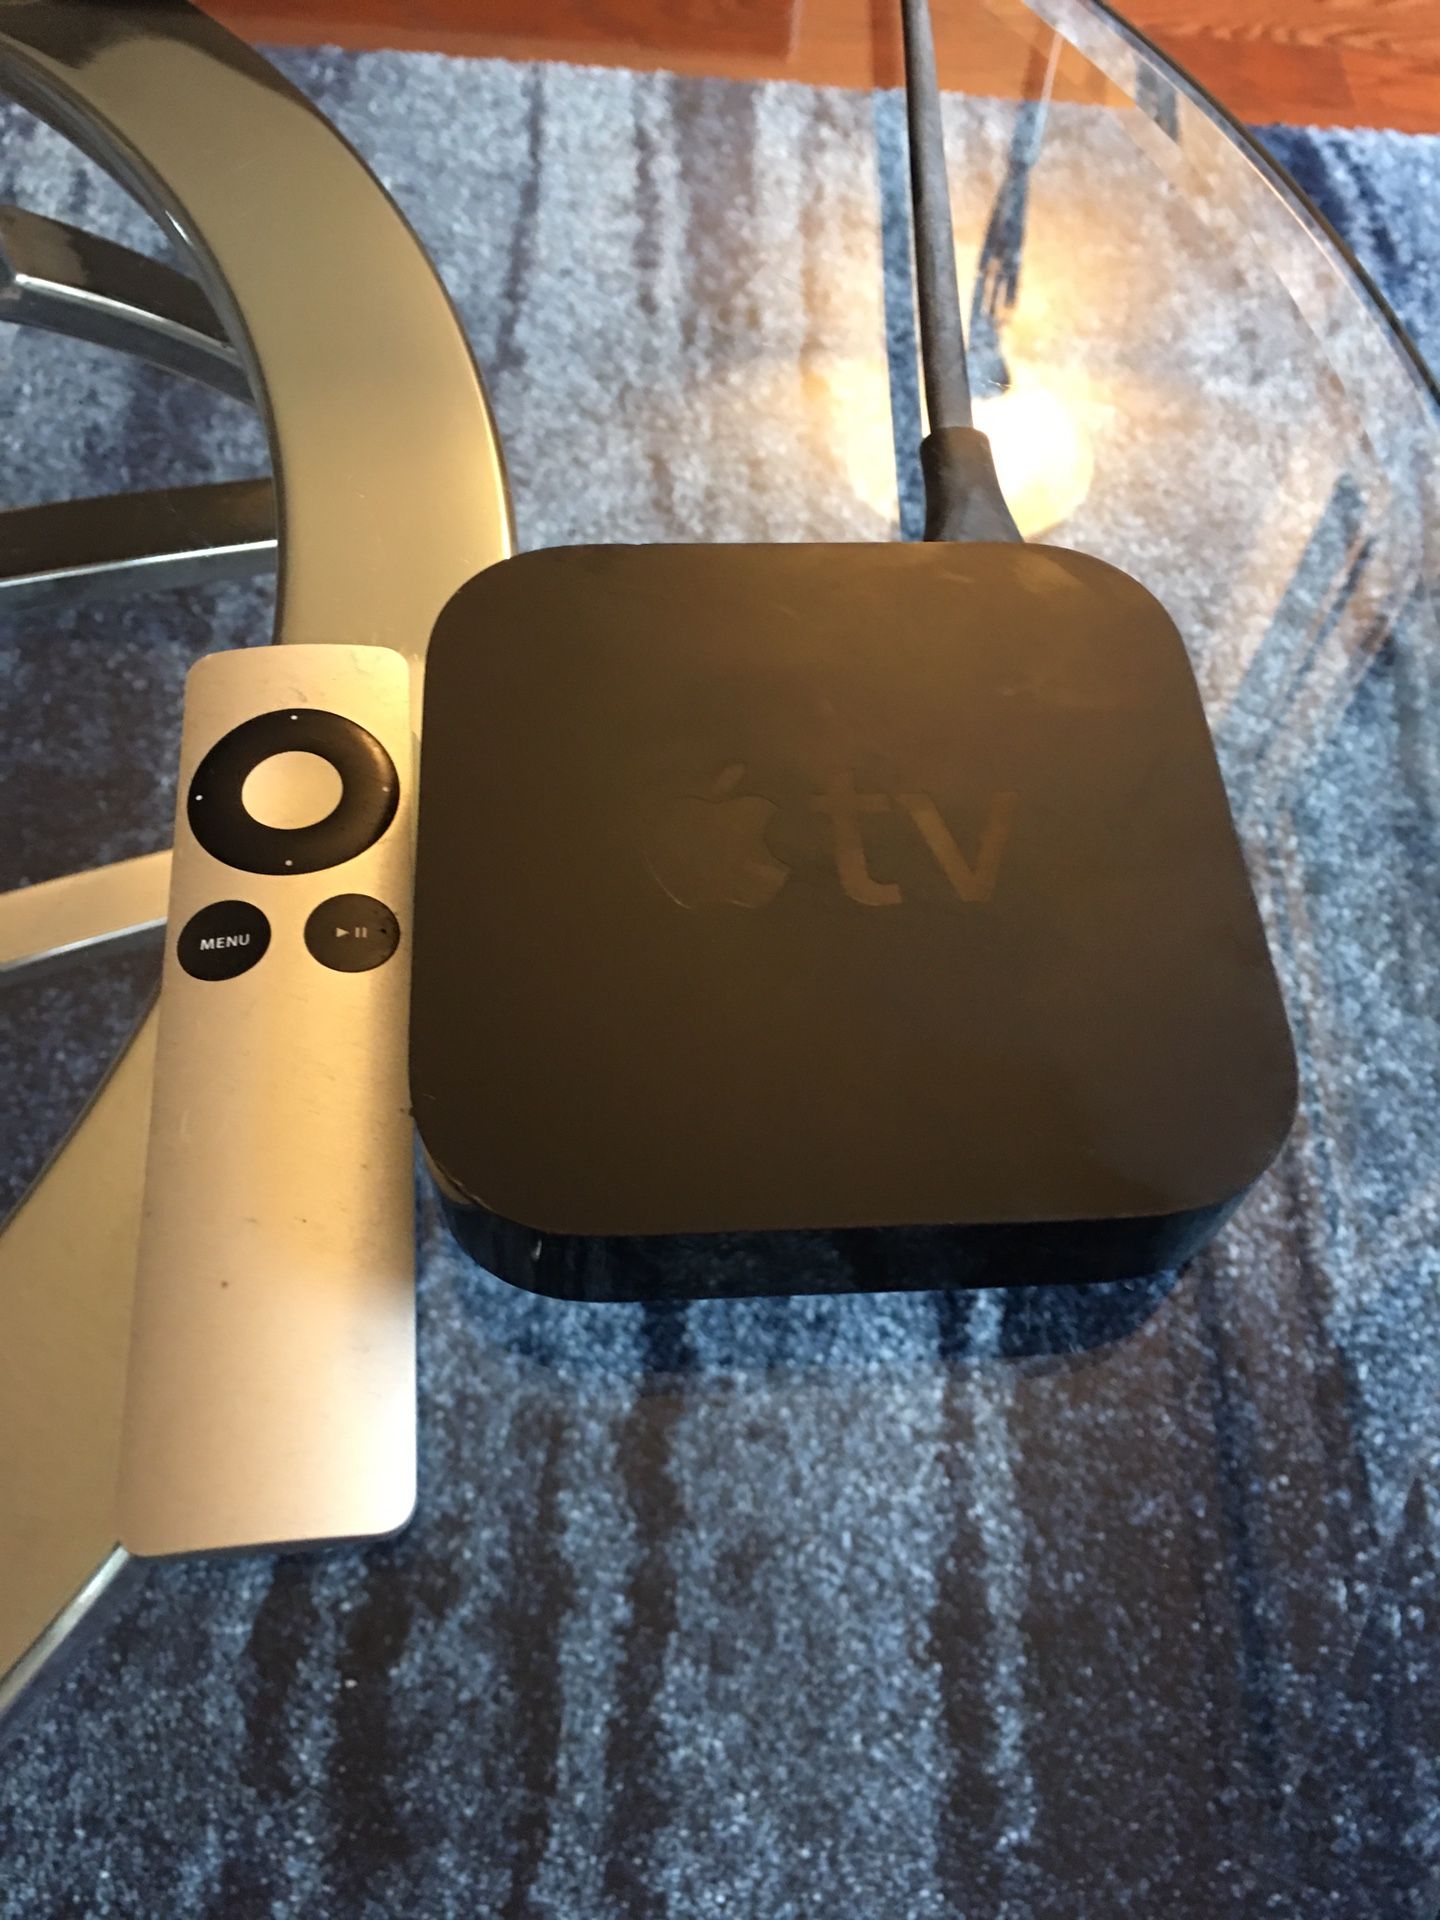 Apple TV 3rd generation with remote!